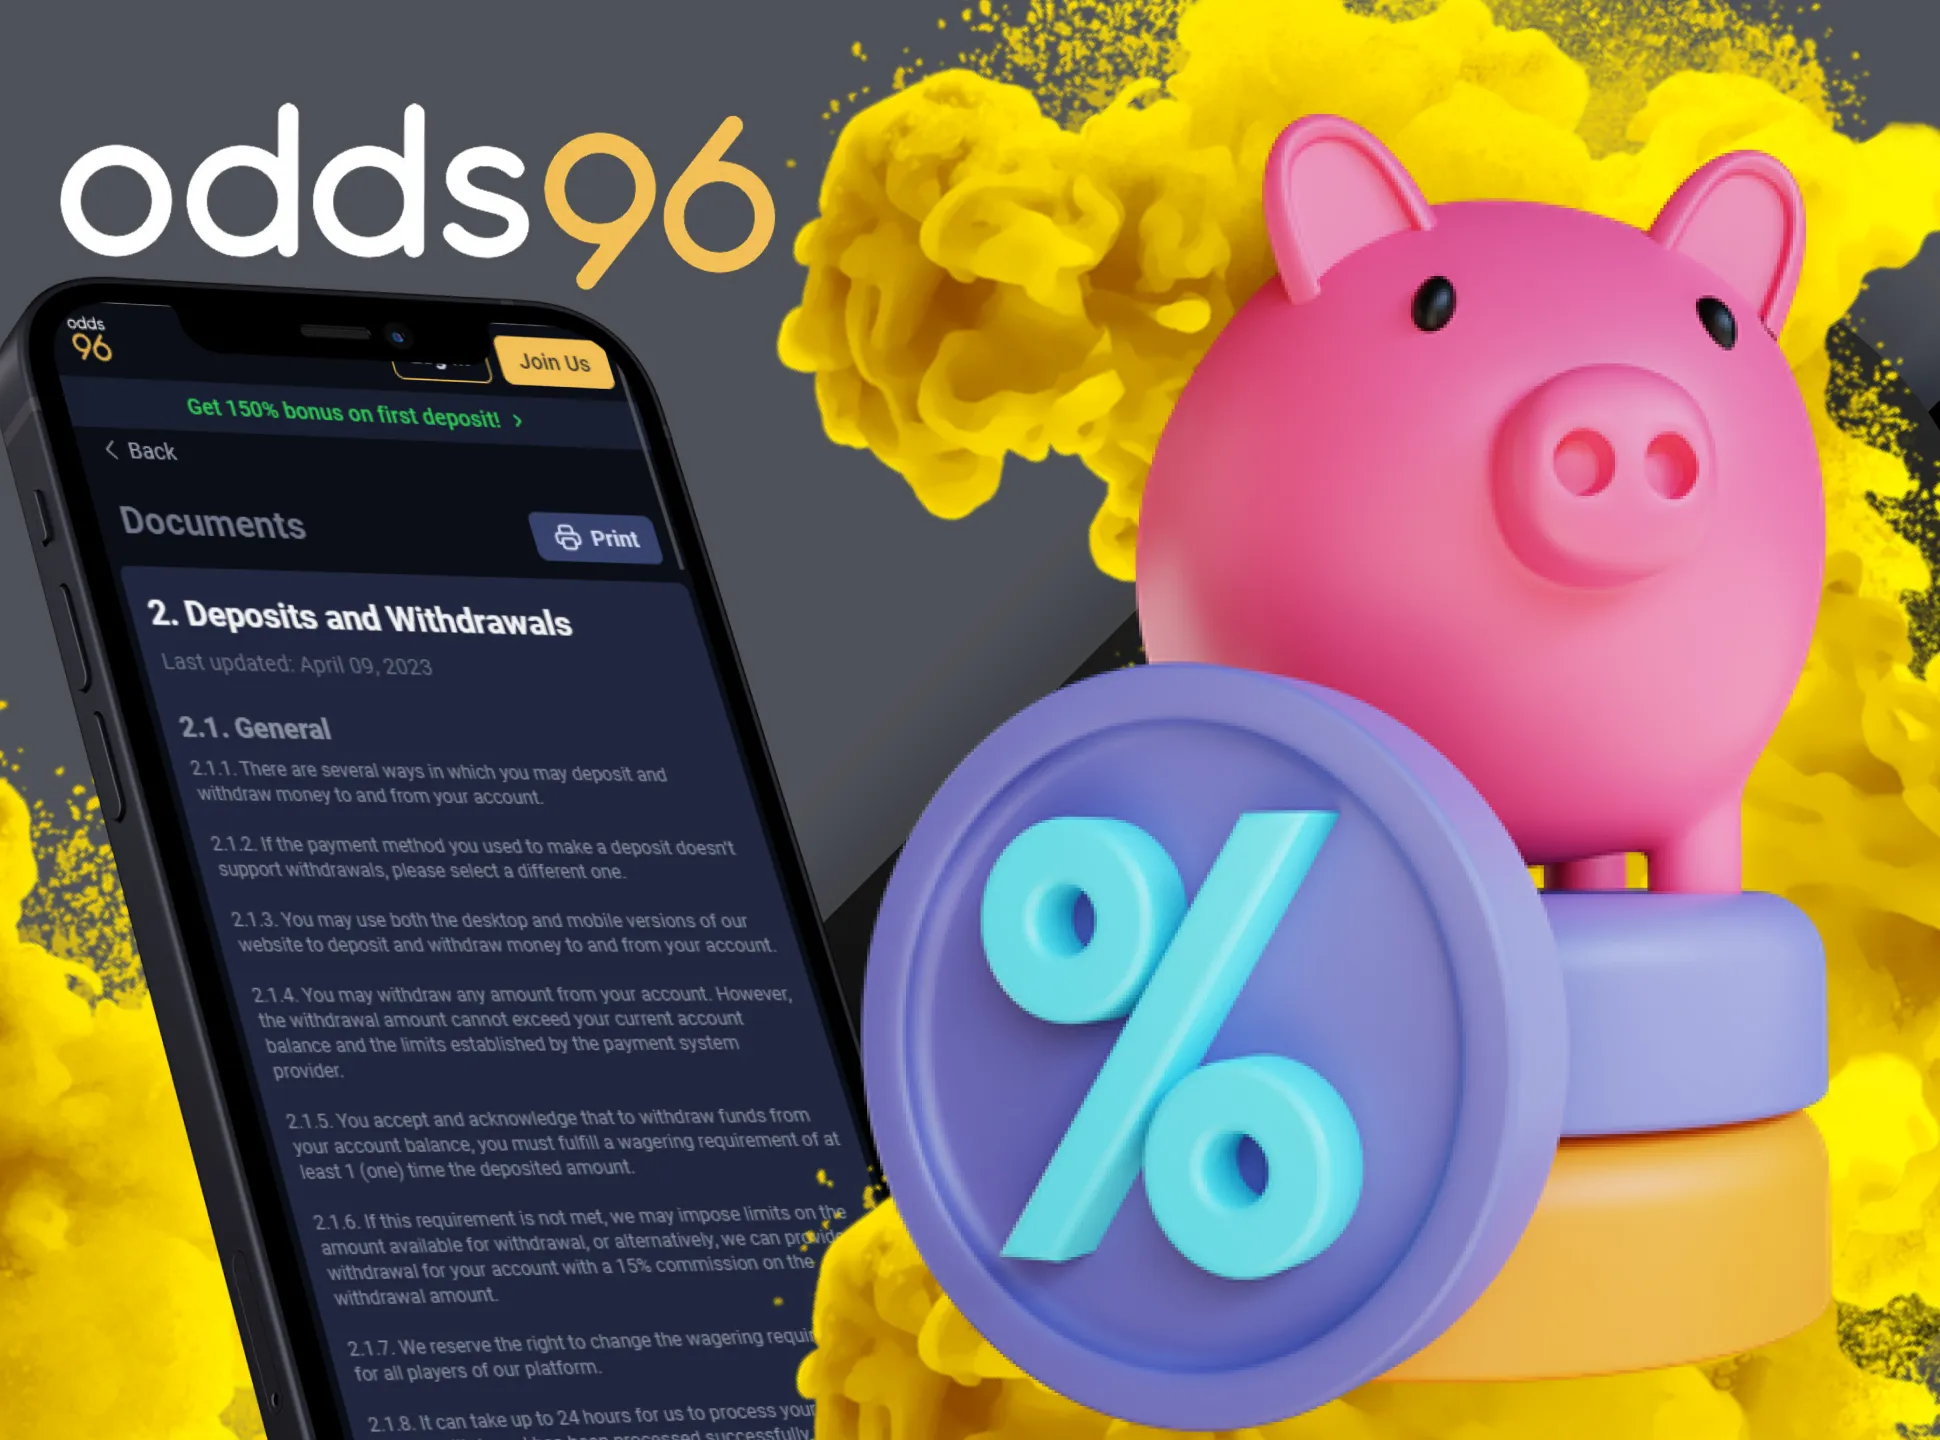 Deposit and withdraw quicker with Odds96 app.